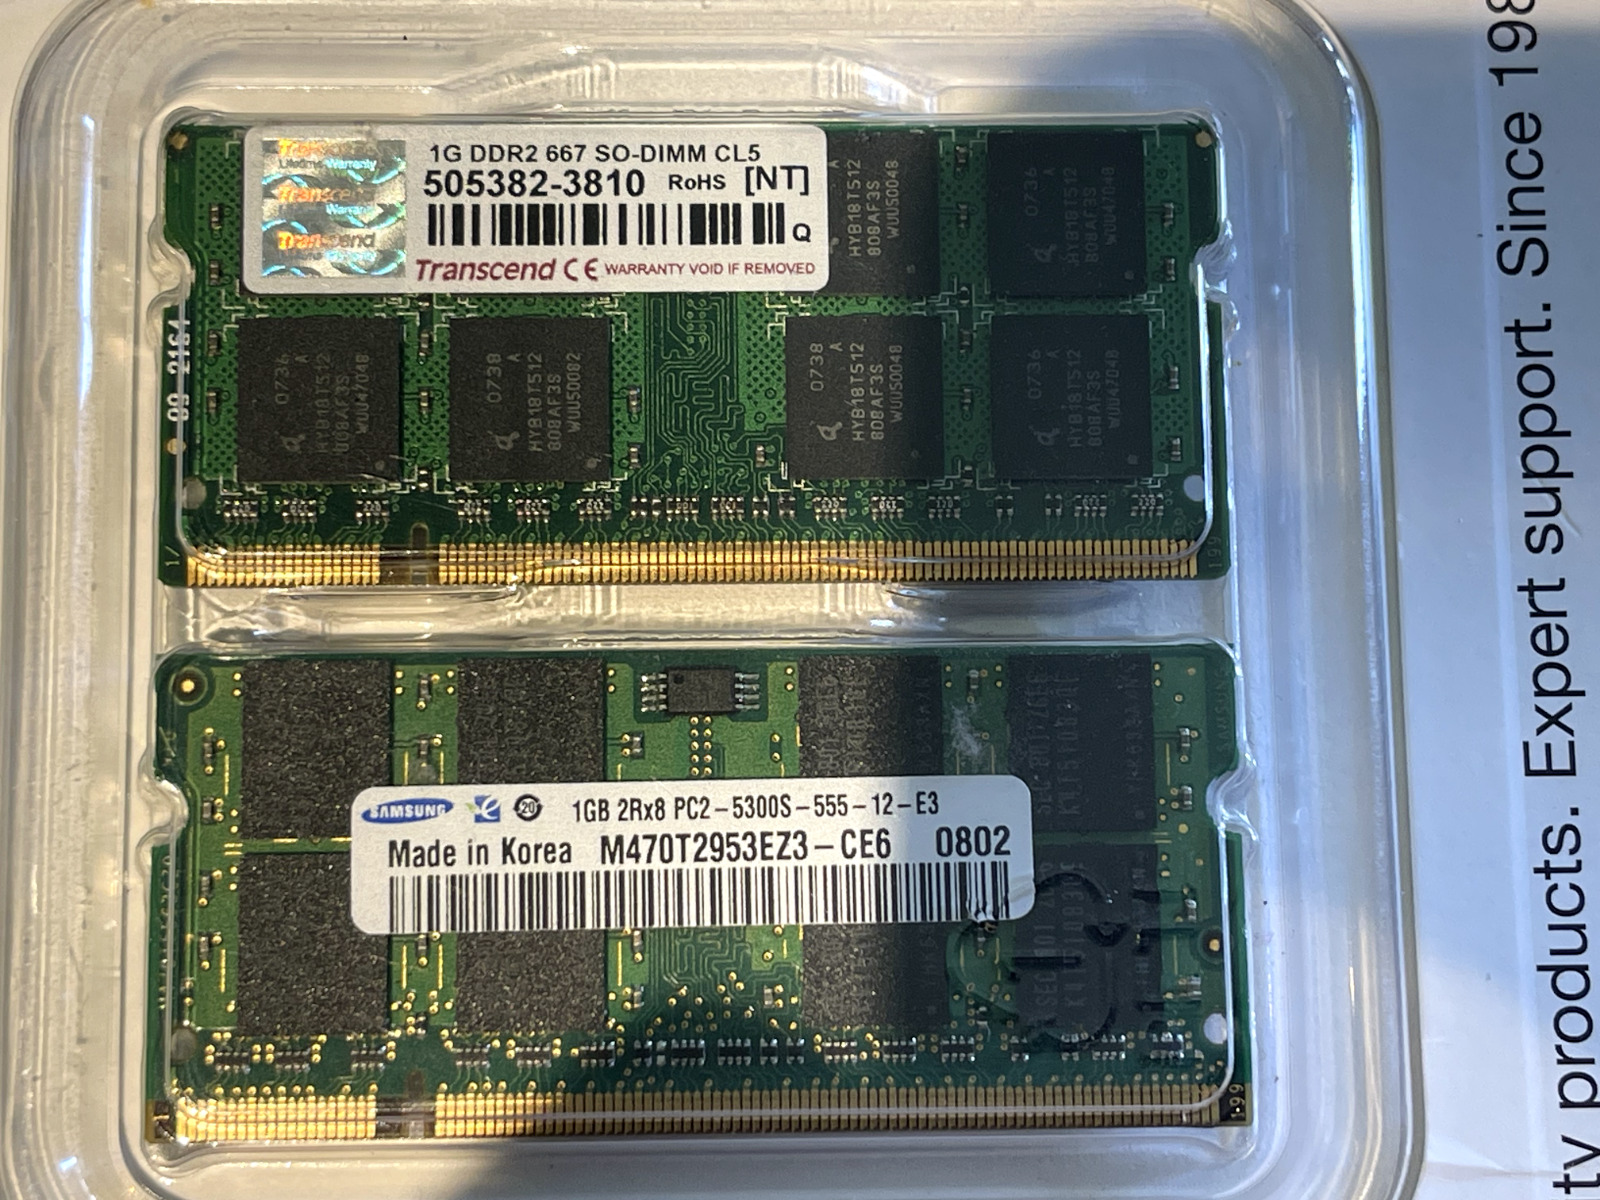 2x 1G DDR2 667 SO-DIMM CL5, Transcend and Samsung, located in USA, working